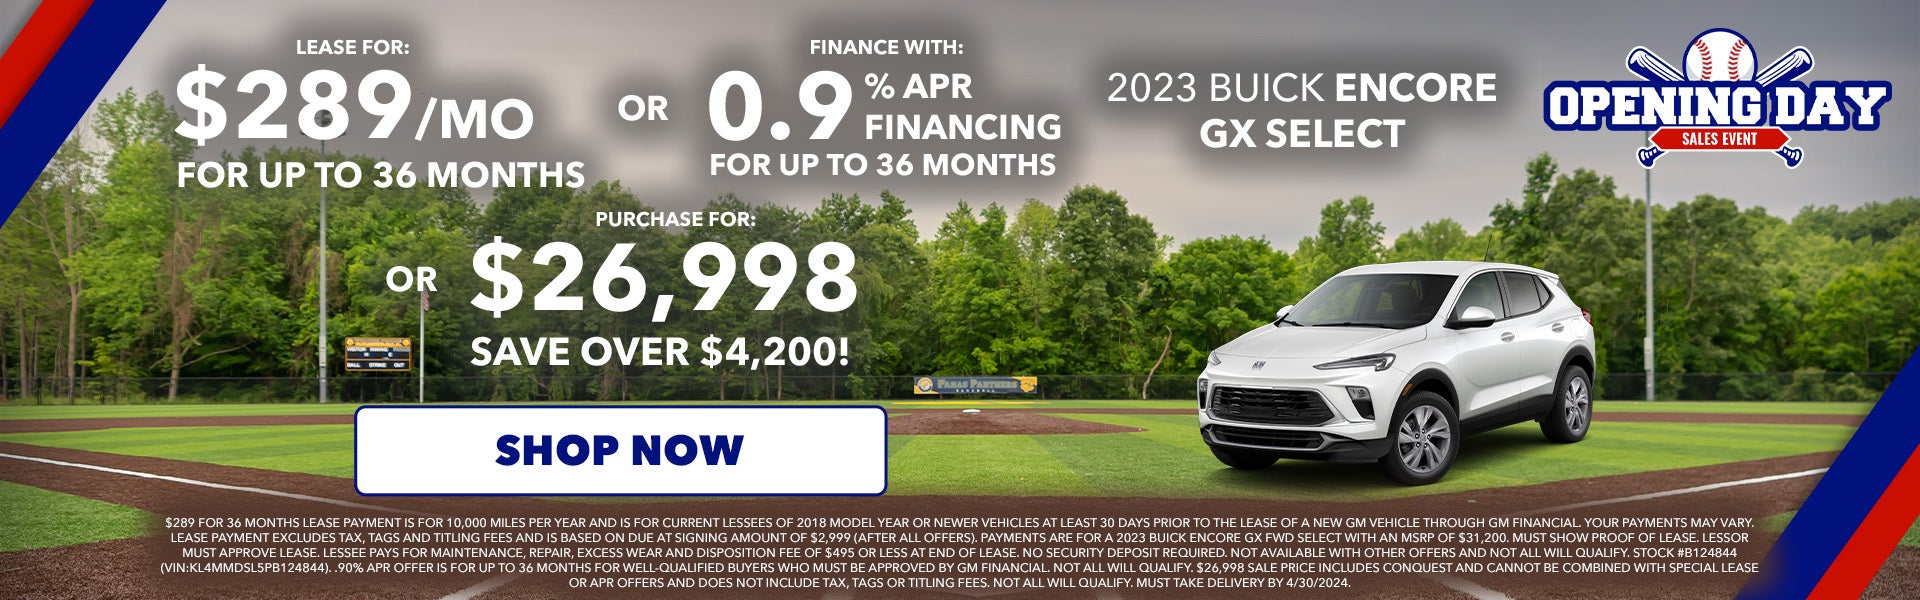 2023 Buick Encore Lease, Finance & Purchase Specials